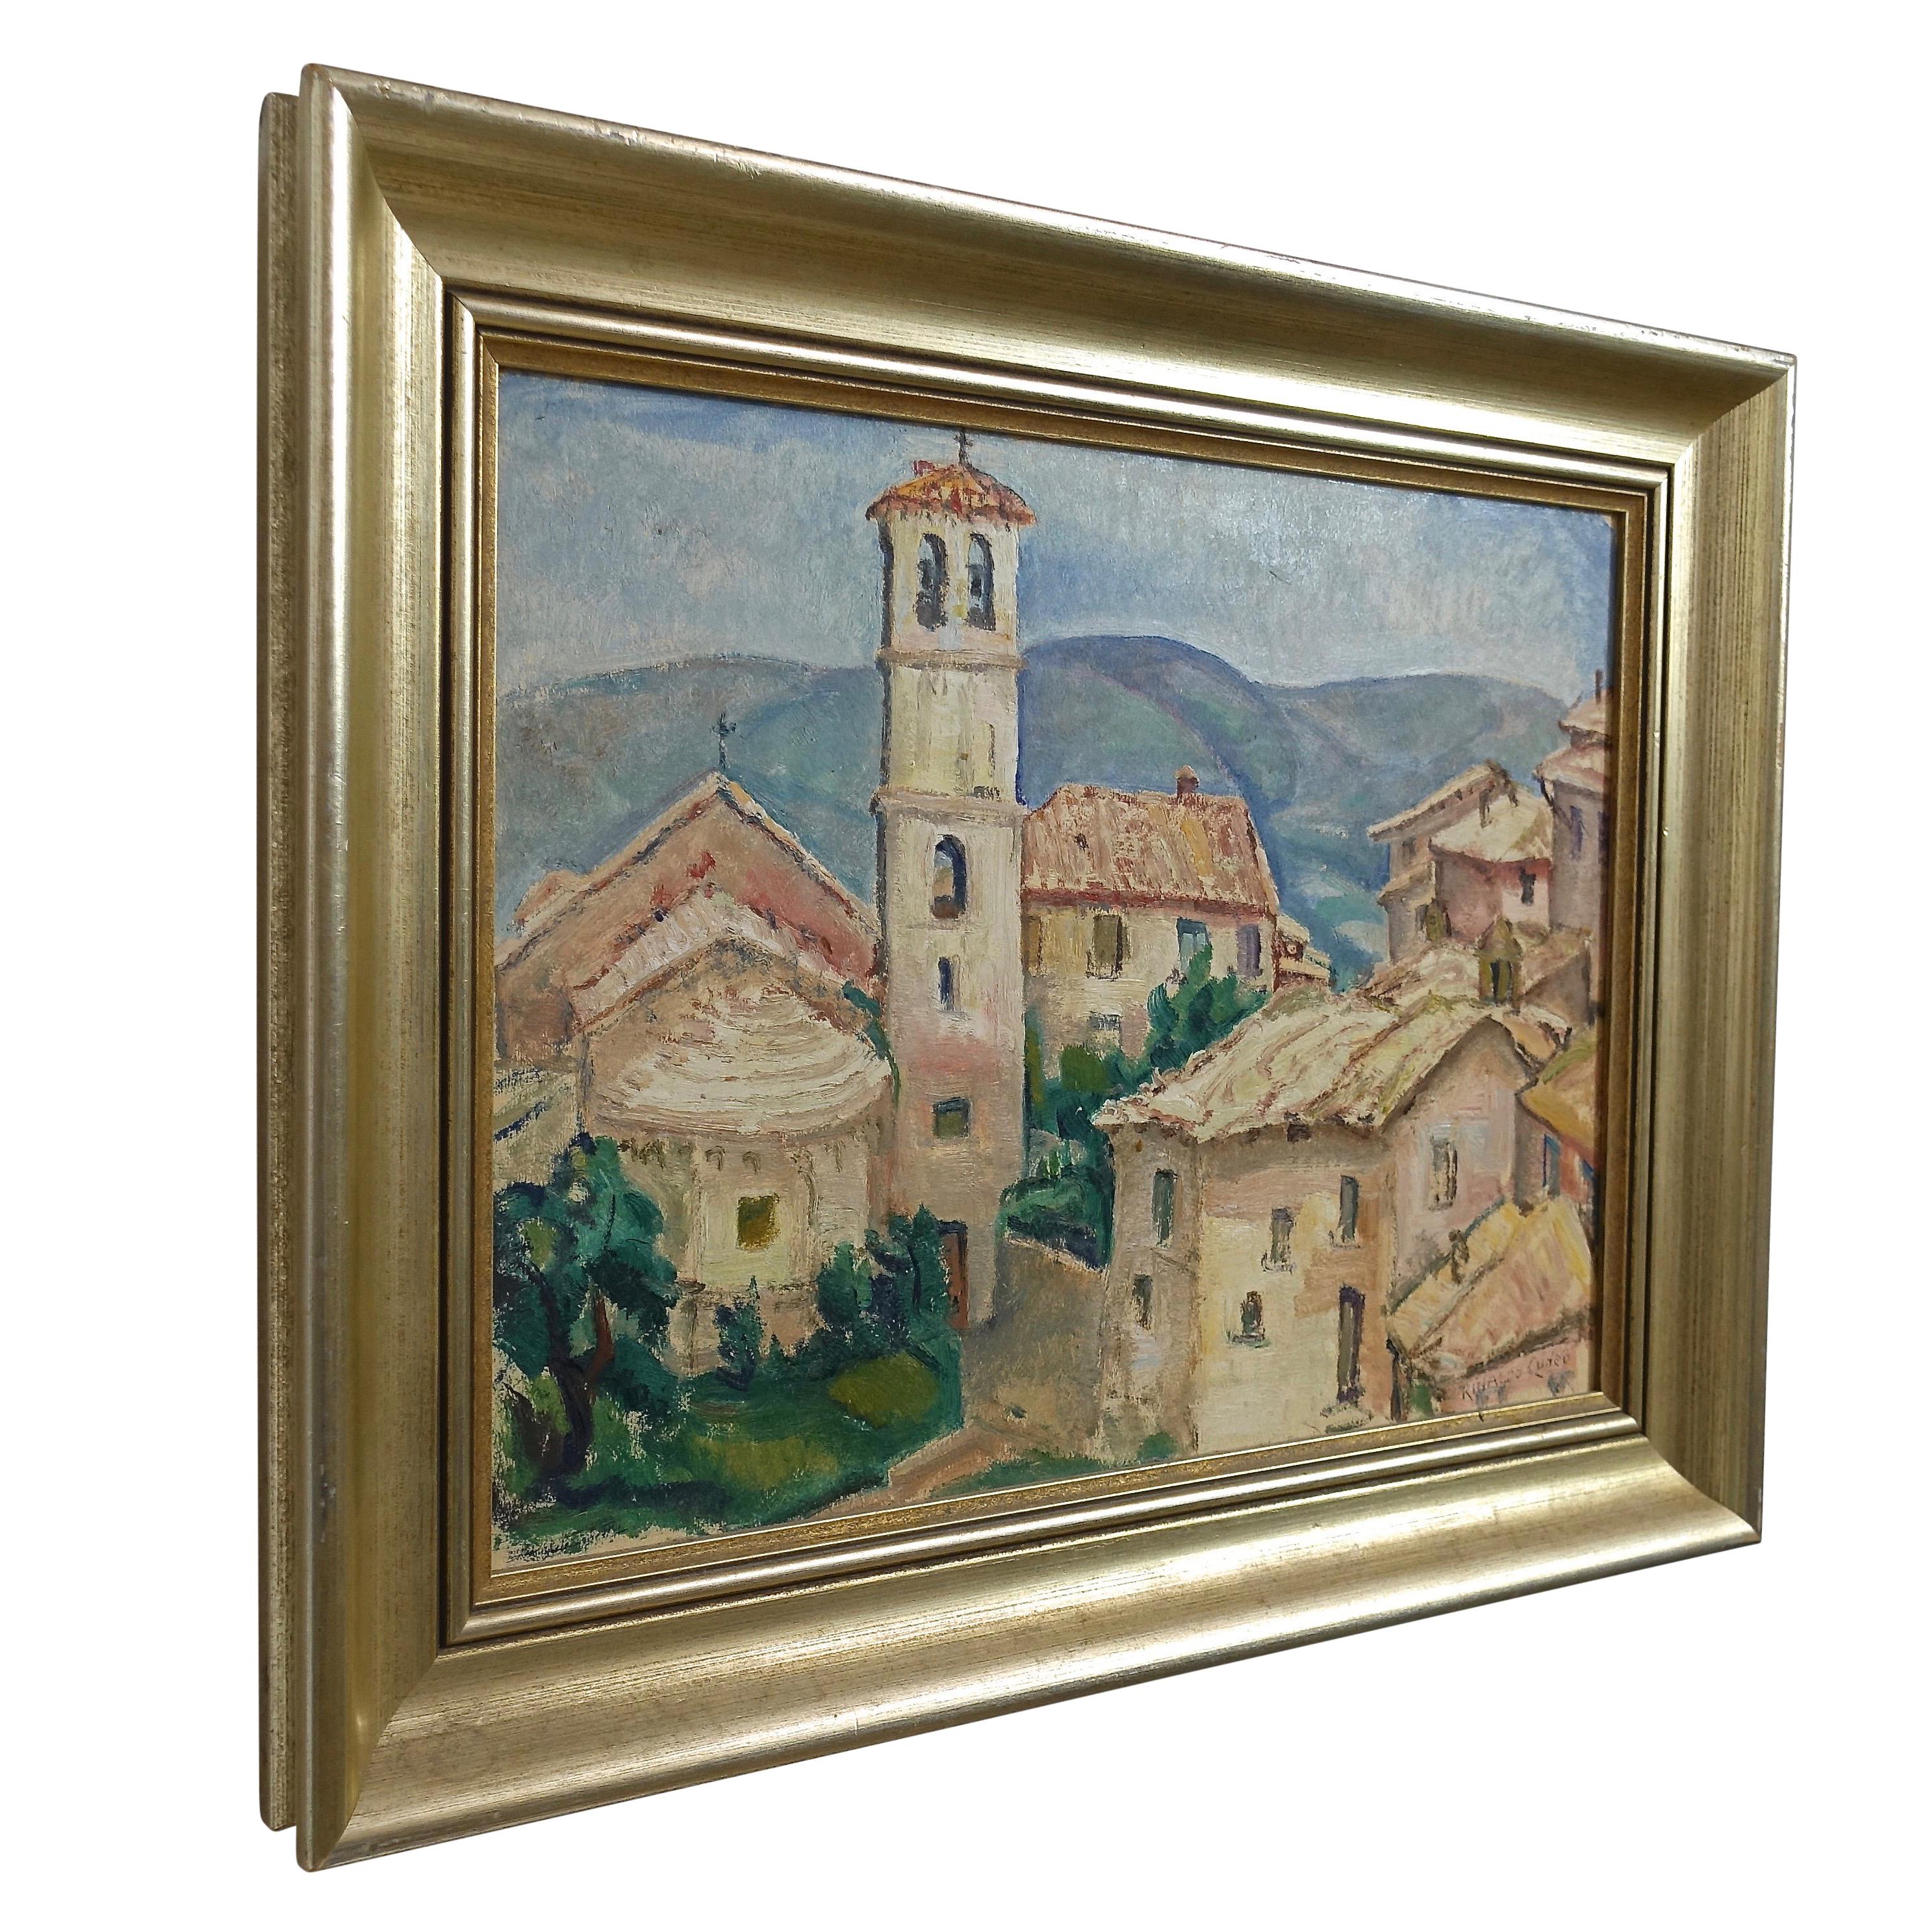 Italian village scene painting by California San Francisco artist Rinaldo Cuneo (b.1877-d.1939). Oil on artist board in giltwood frame. American, early 20th century.
Born in San Francisco, California and raised in the North Beach area, Rinaldo Cuneo